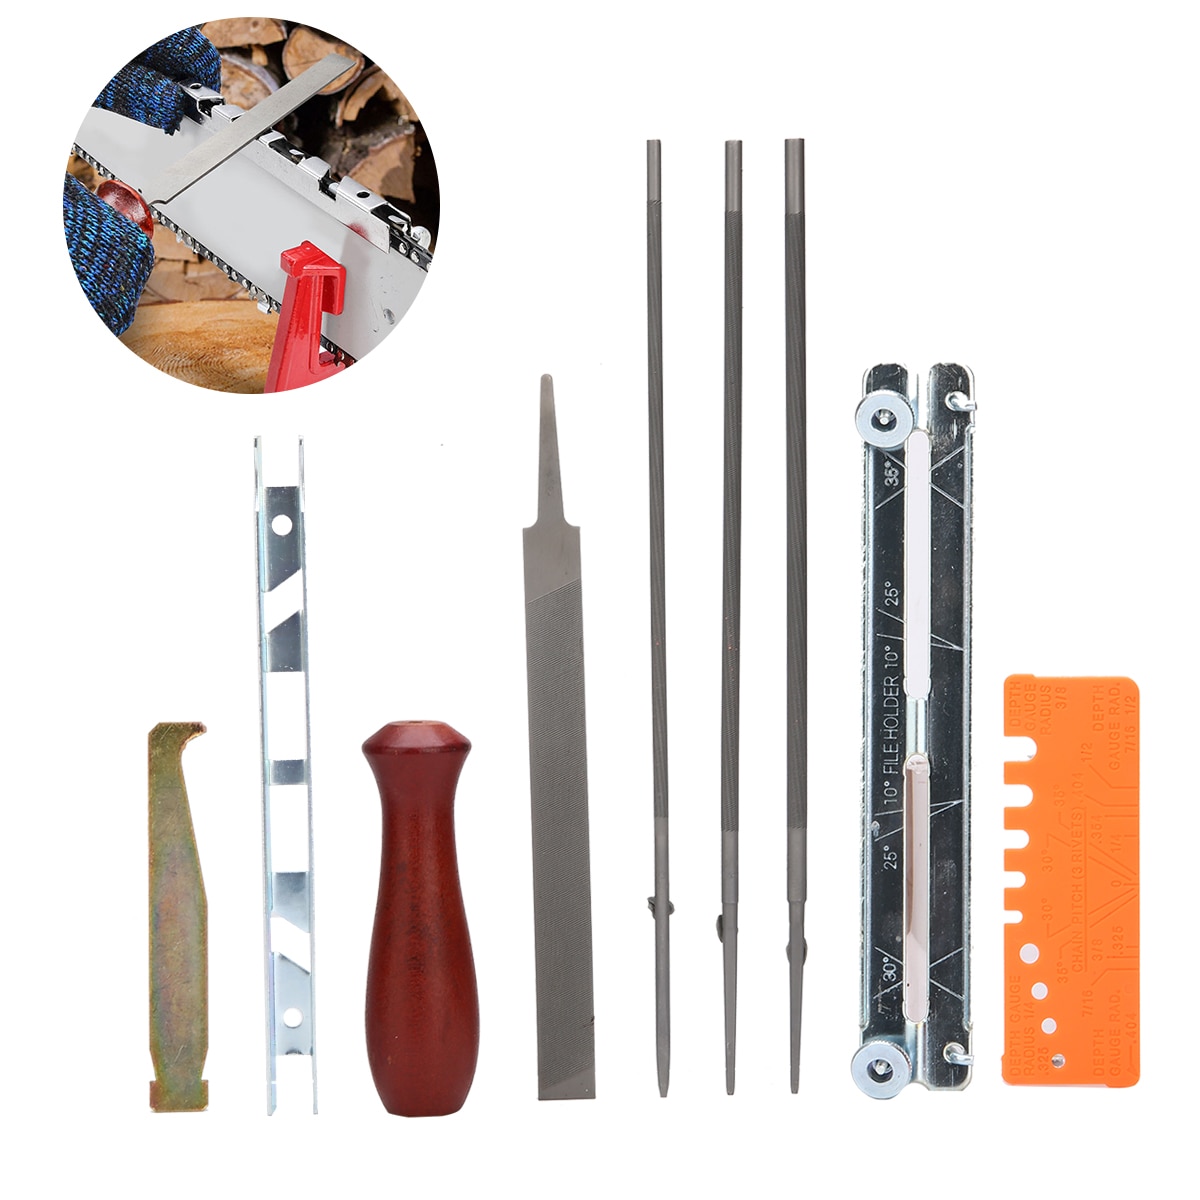 10Pcs/Set Chainsaw Chain Sharpening Kit Tool Set Guide Bar File Sharpener Tools Durable For sharpen your chainsaw